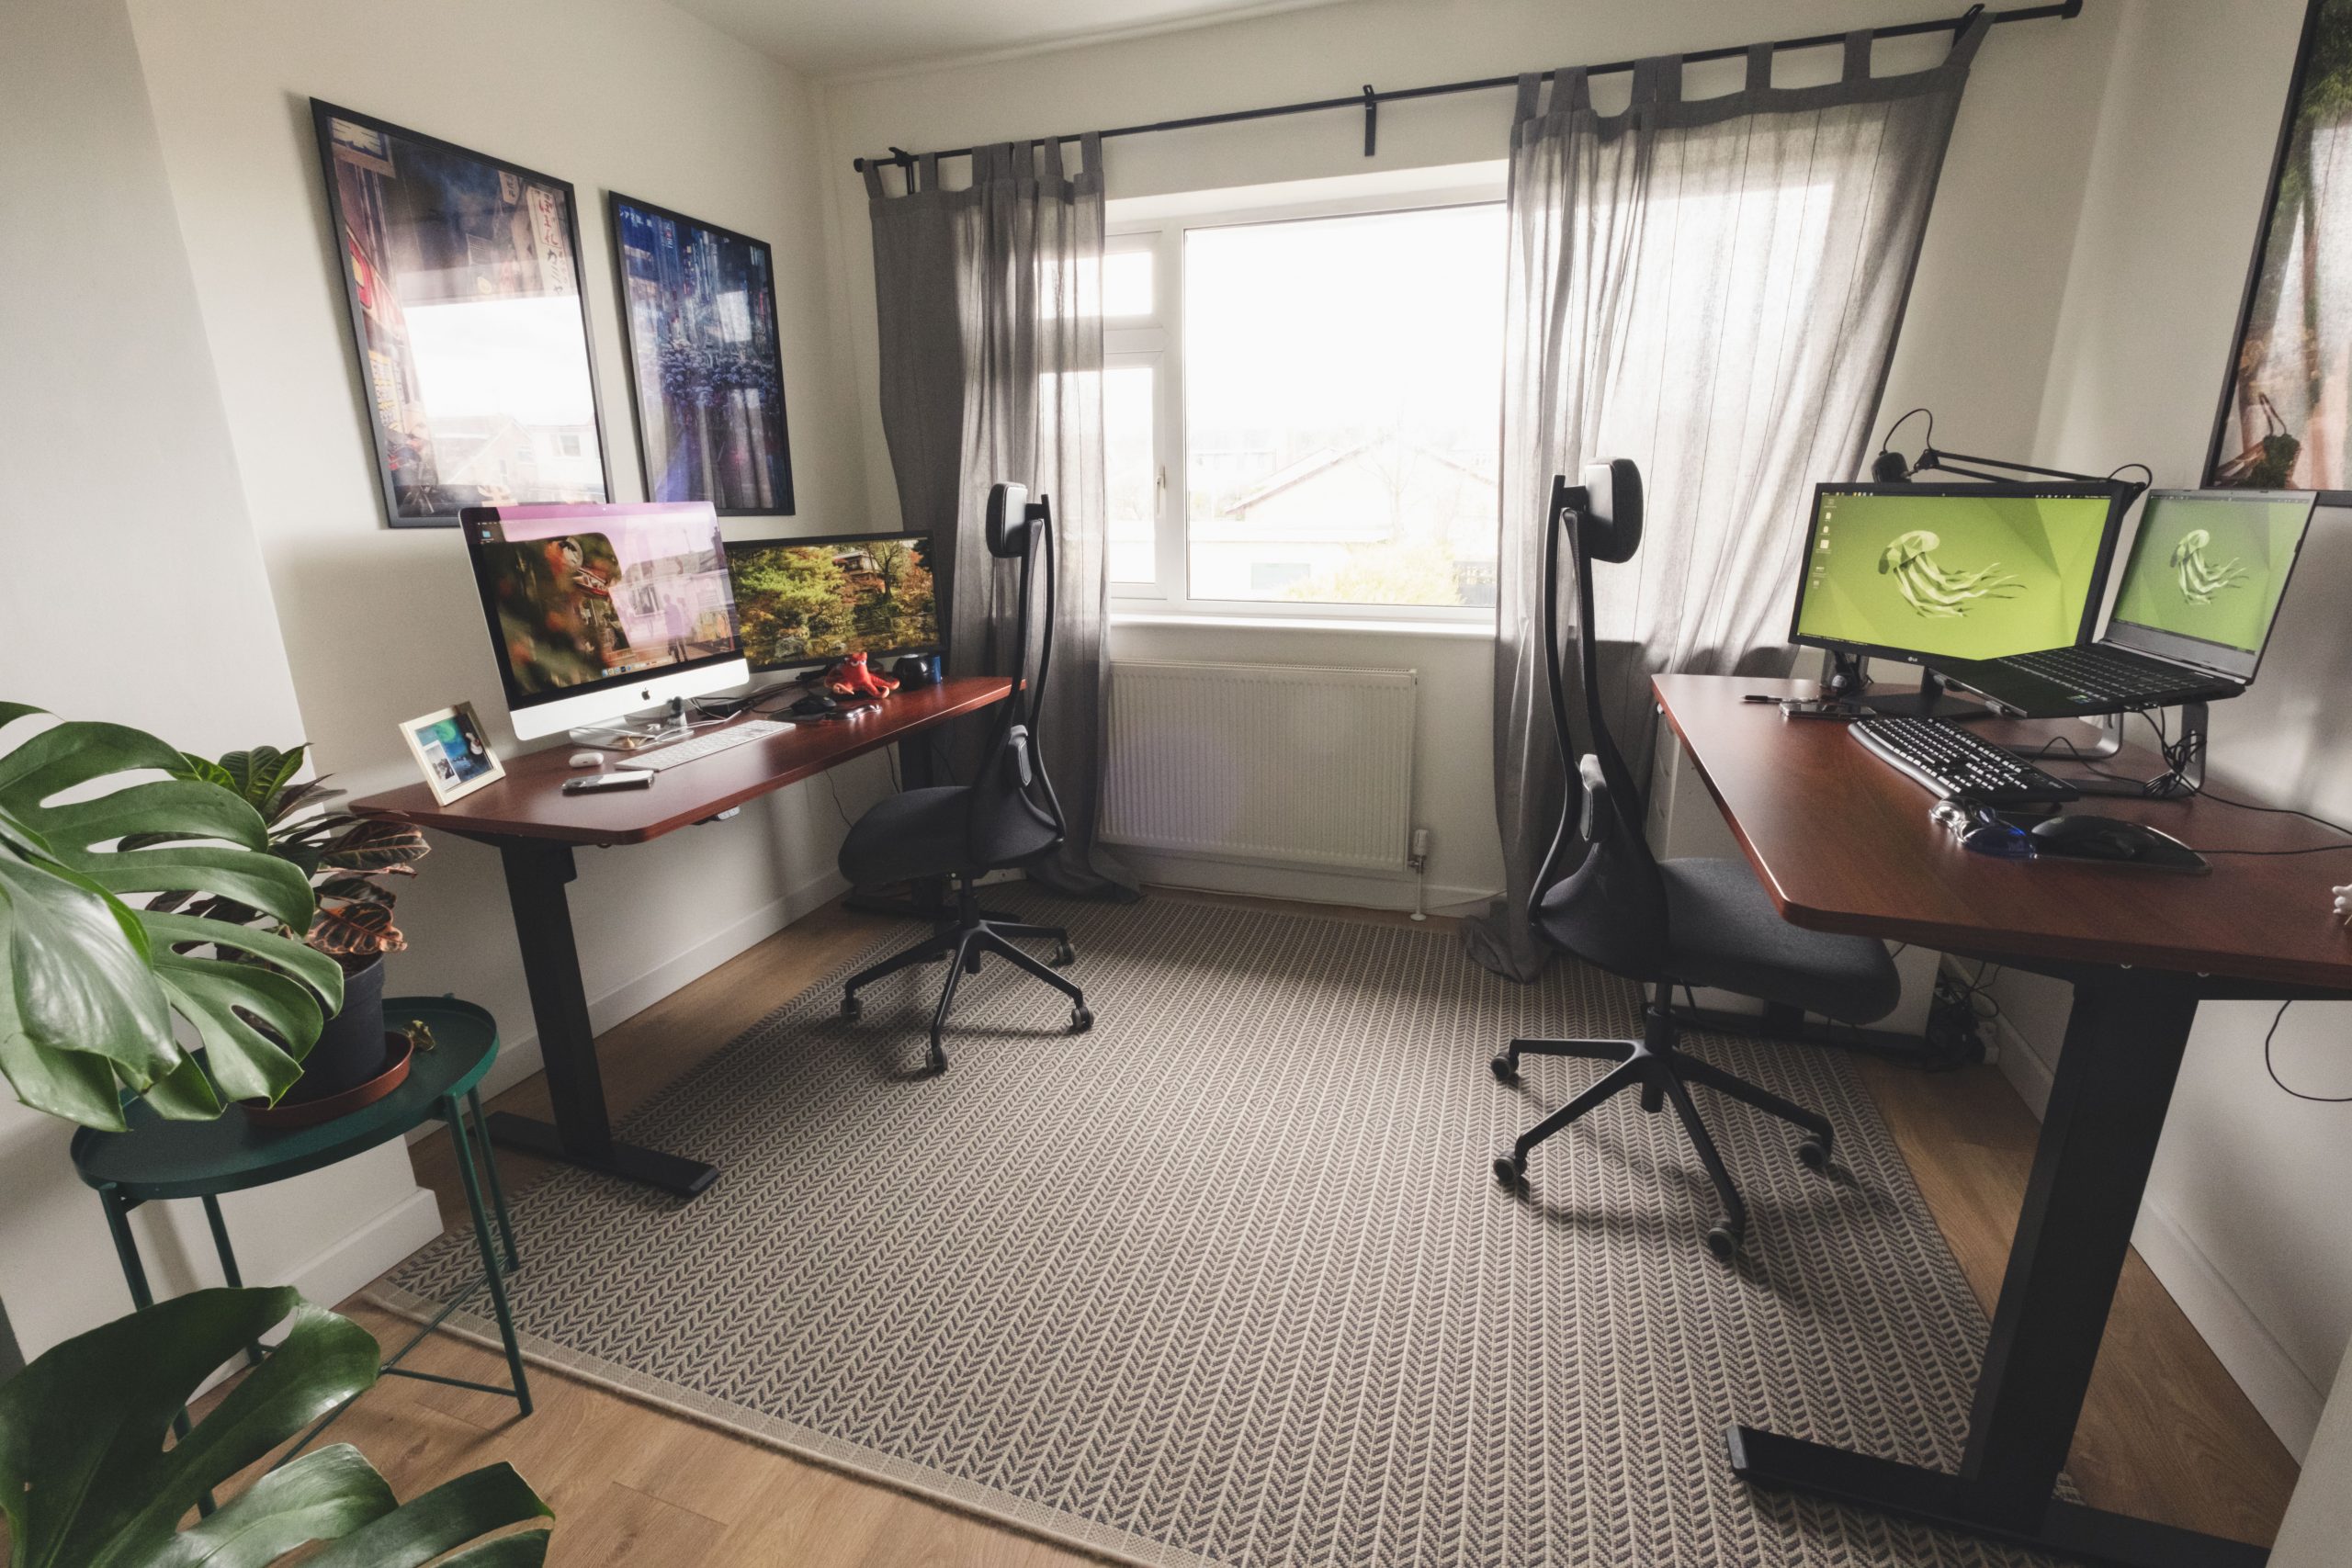 Our home office with standing desks from Flexispot